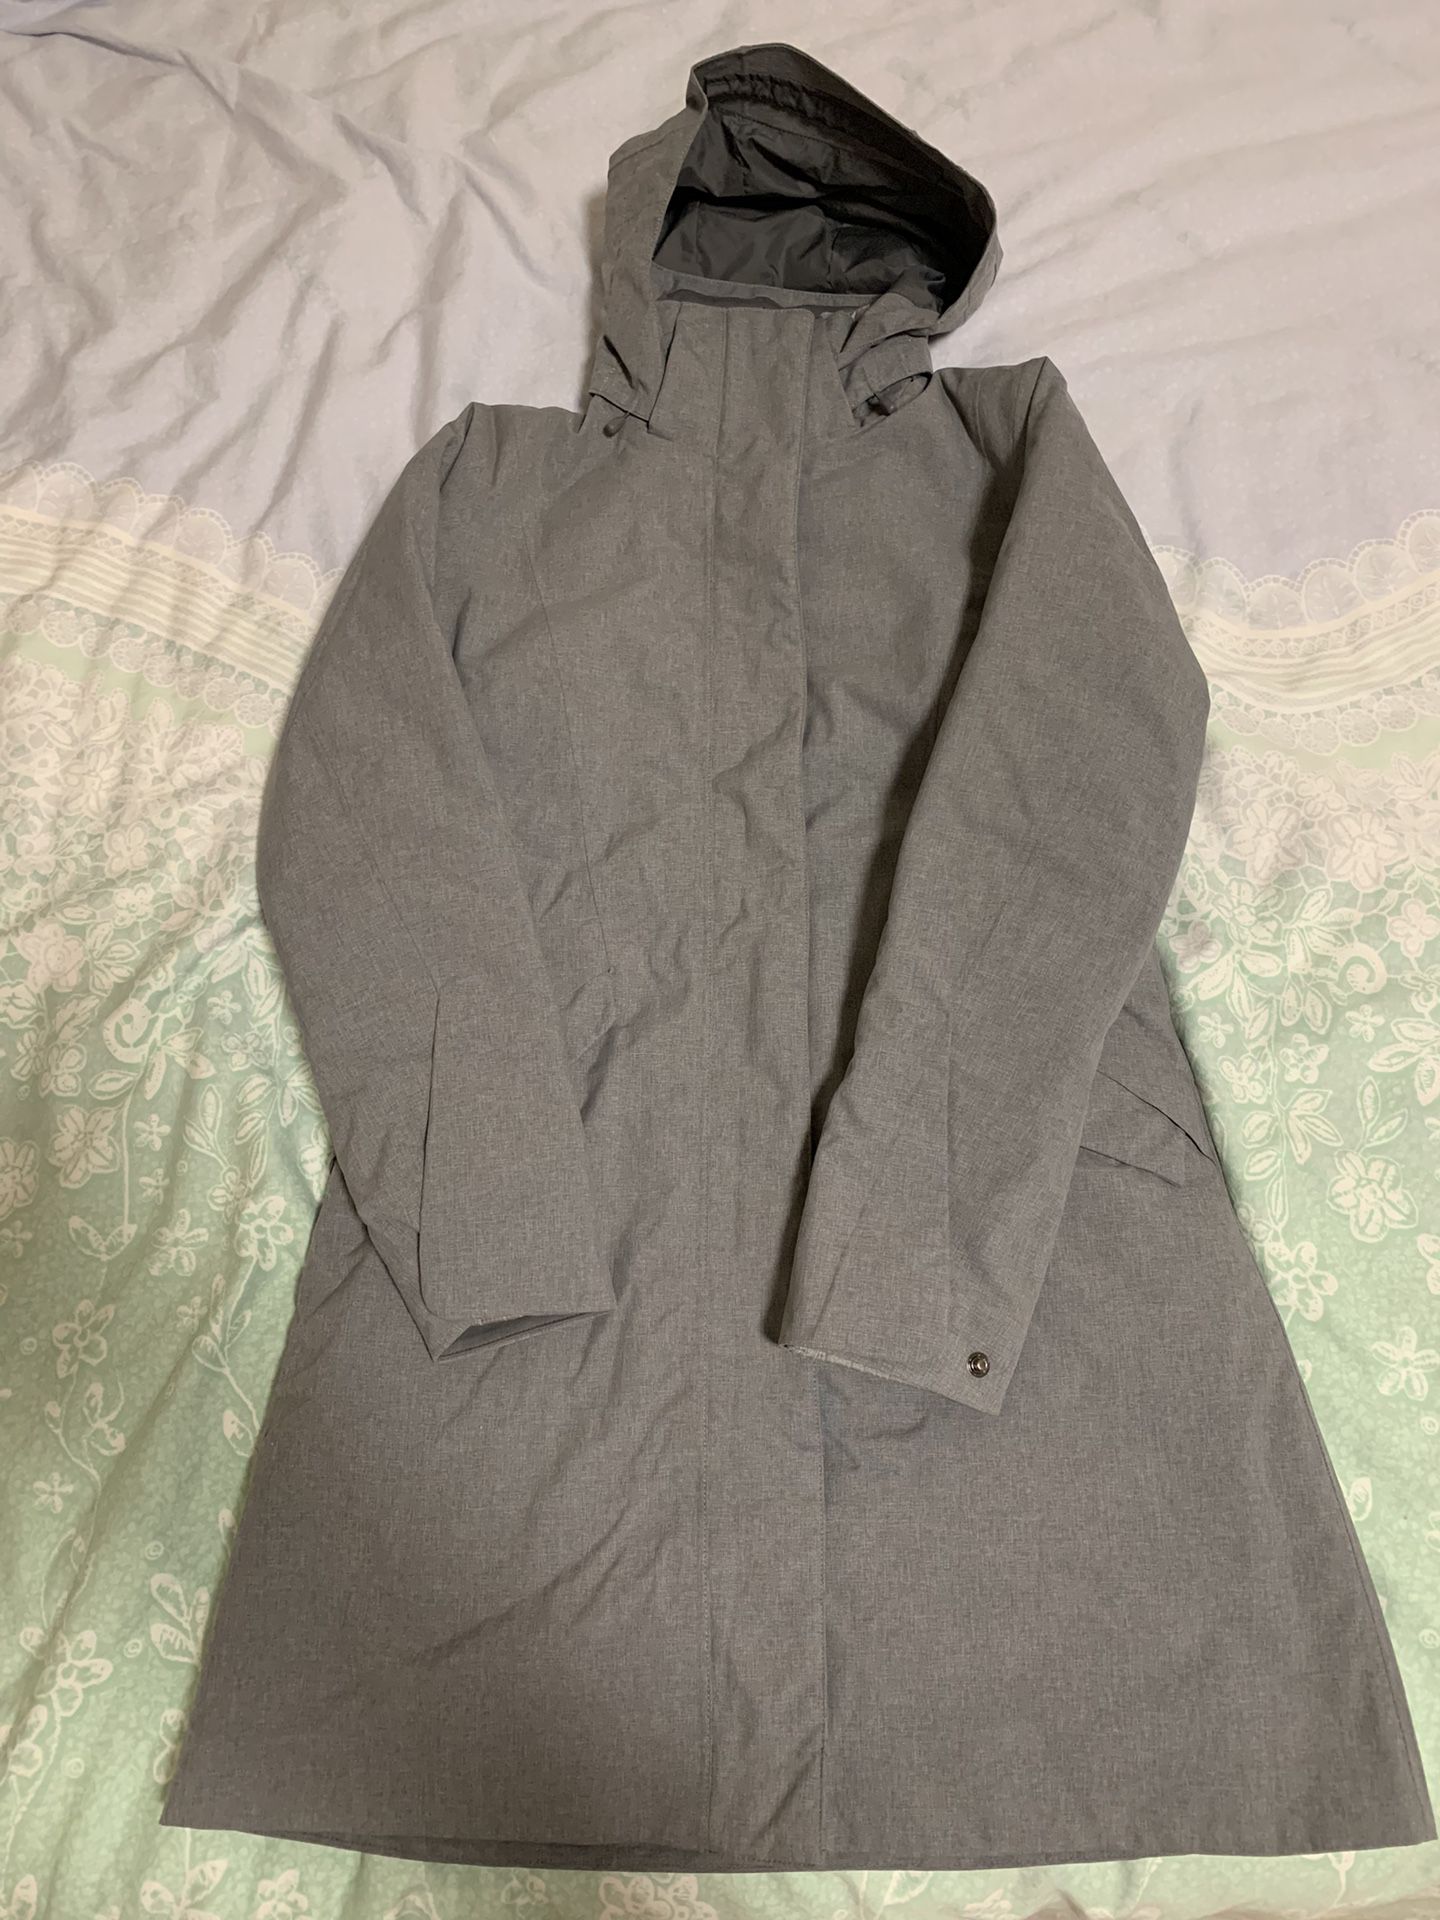 Patagonia Vosque 3-in-1 Parka (size S)